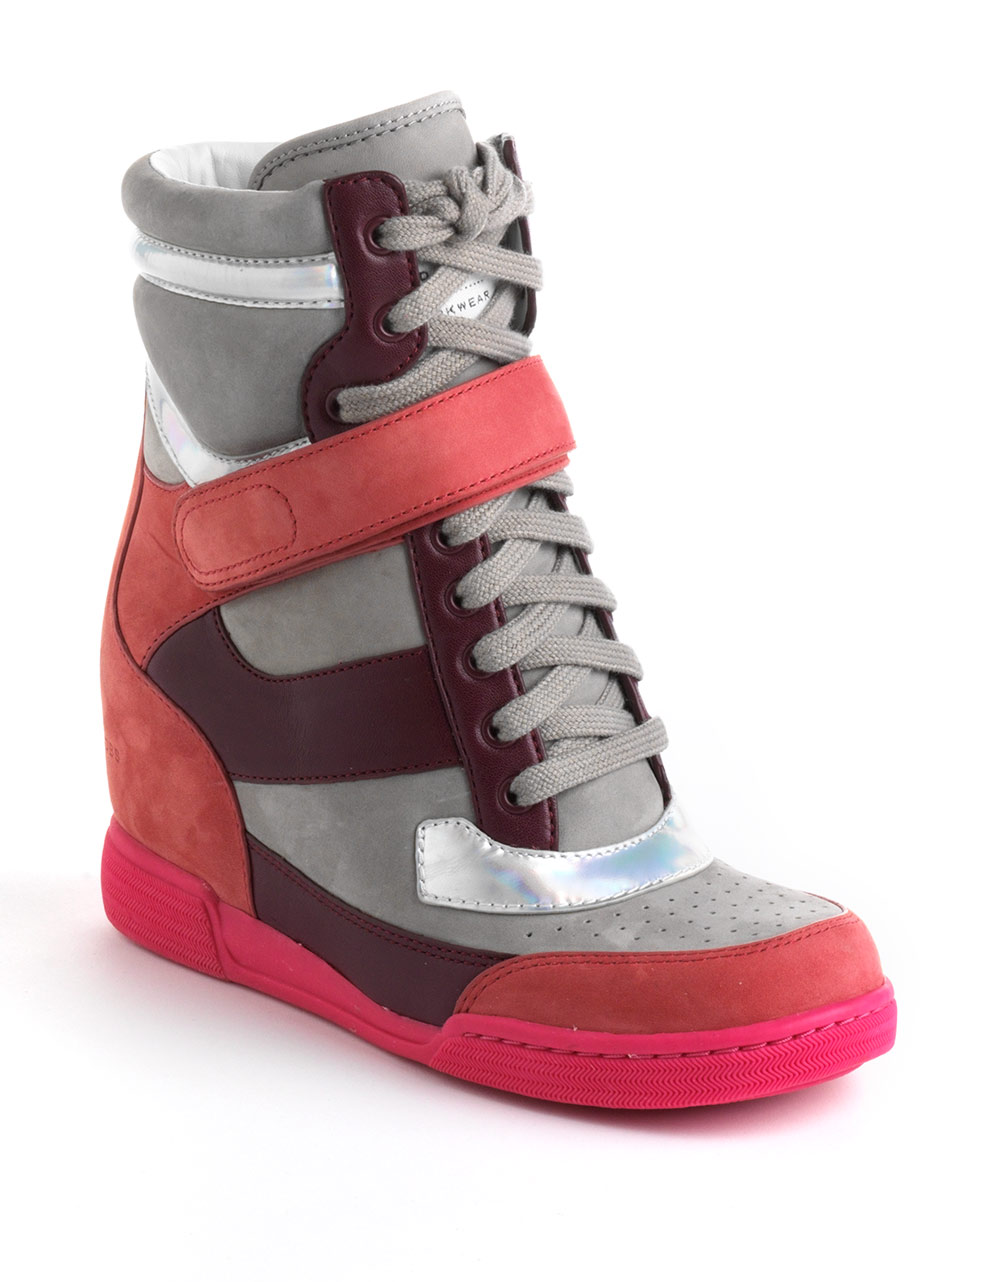 Marc By Marc Jacobs Leather High Top Wedge Sneakers in Silver (grey